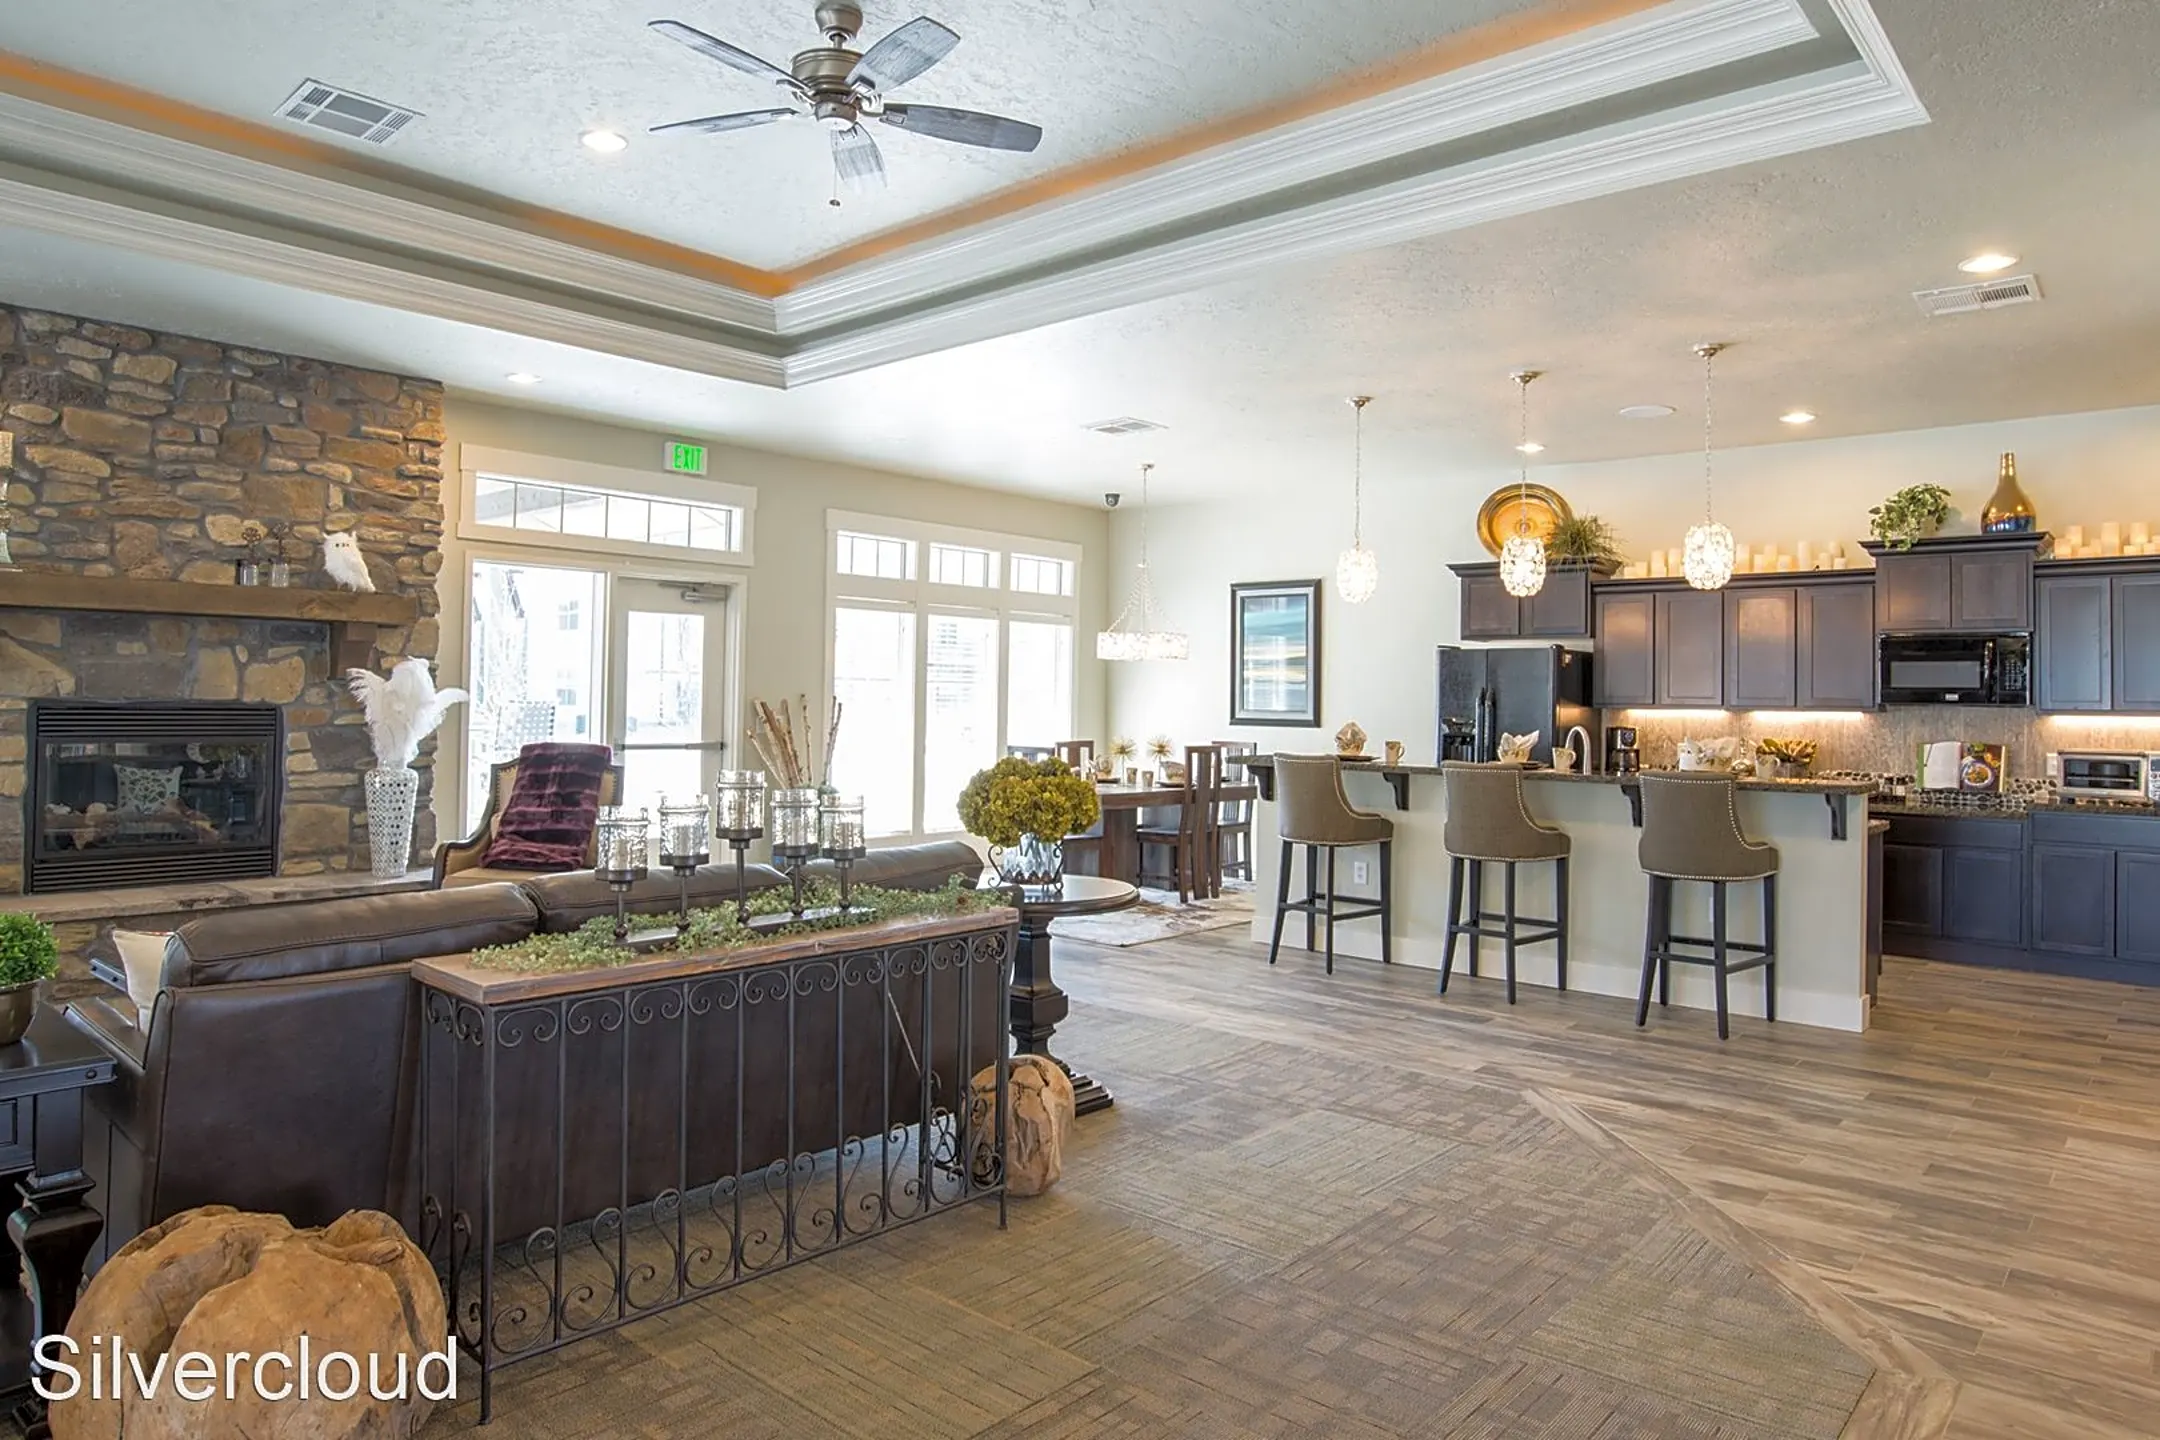 Dining Room - Retreat at Silvercloud - Boise, ID